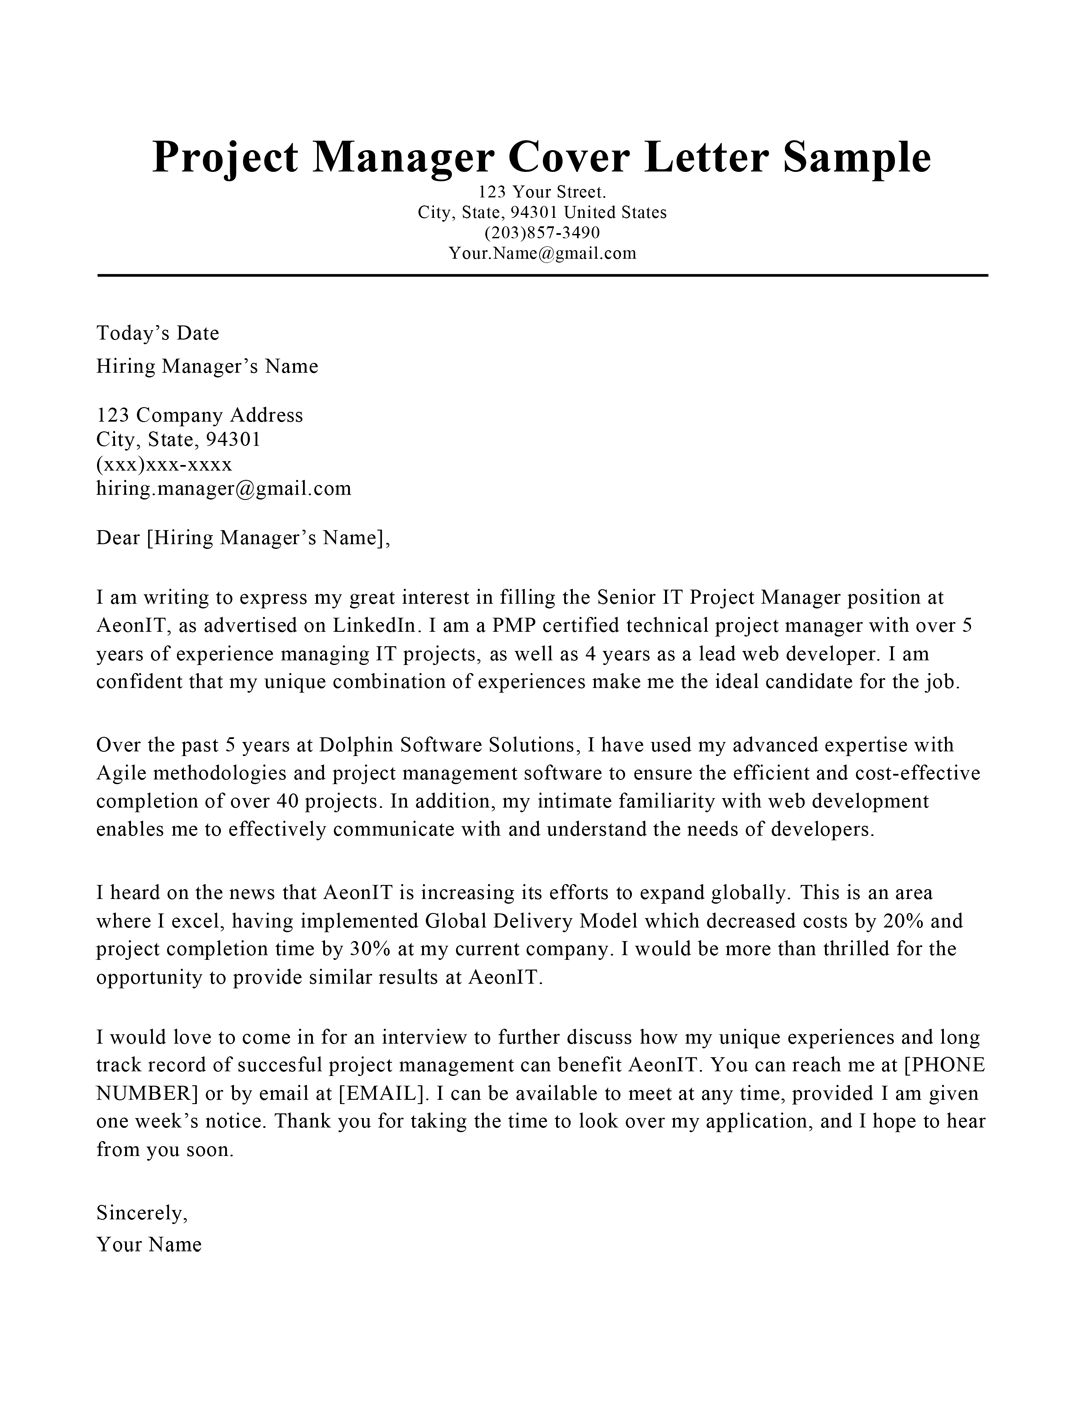 Project Manager Cover Letter Sample & Tips | Resume Companion